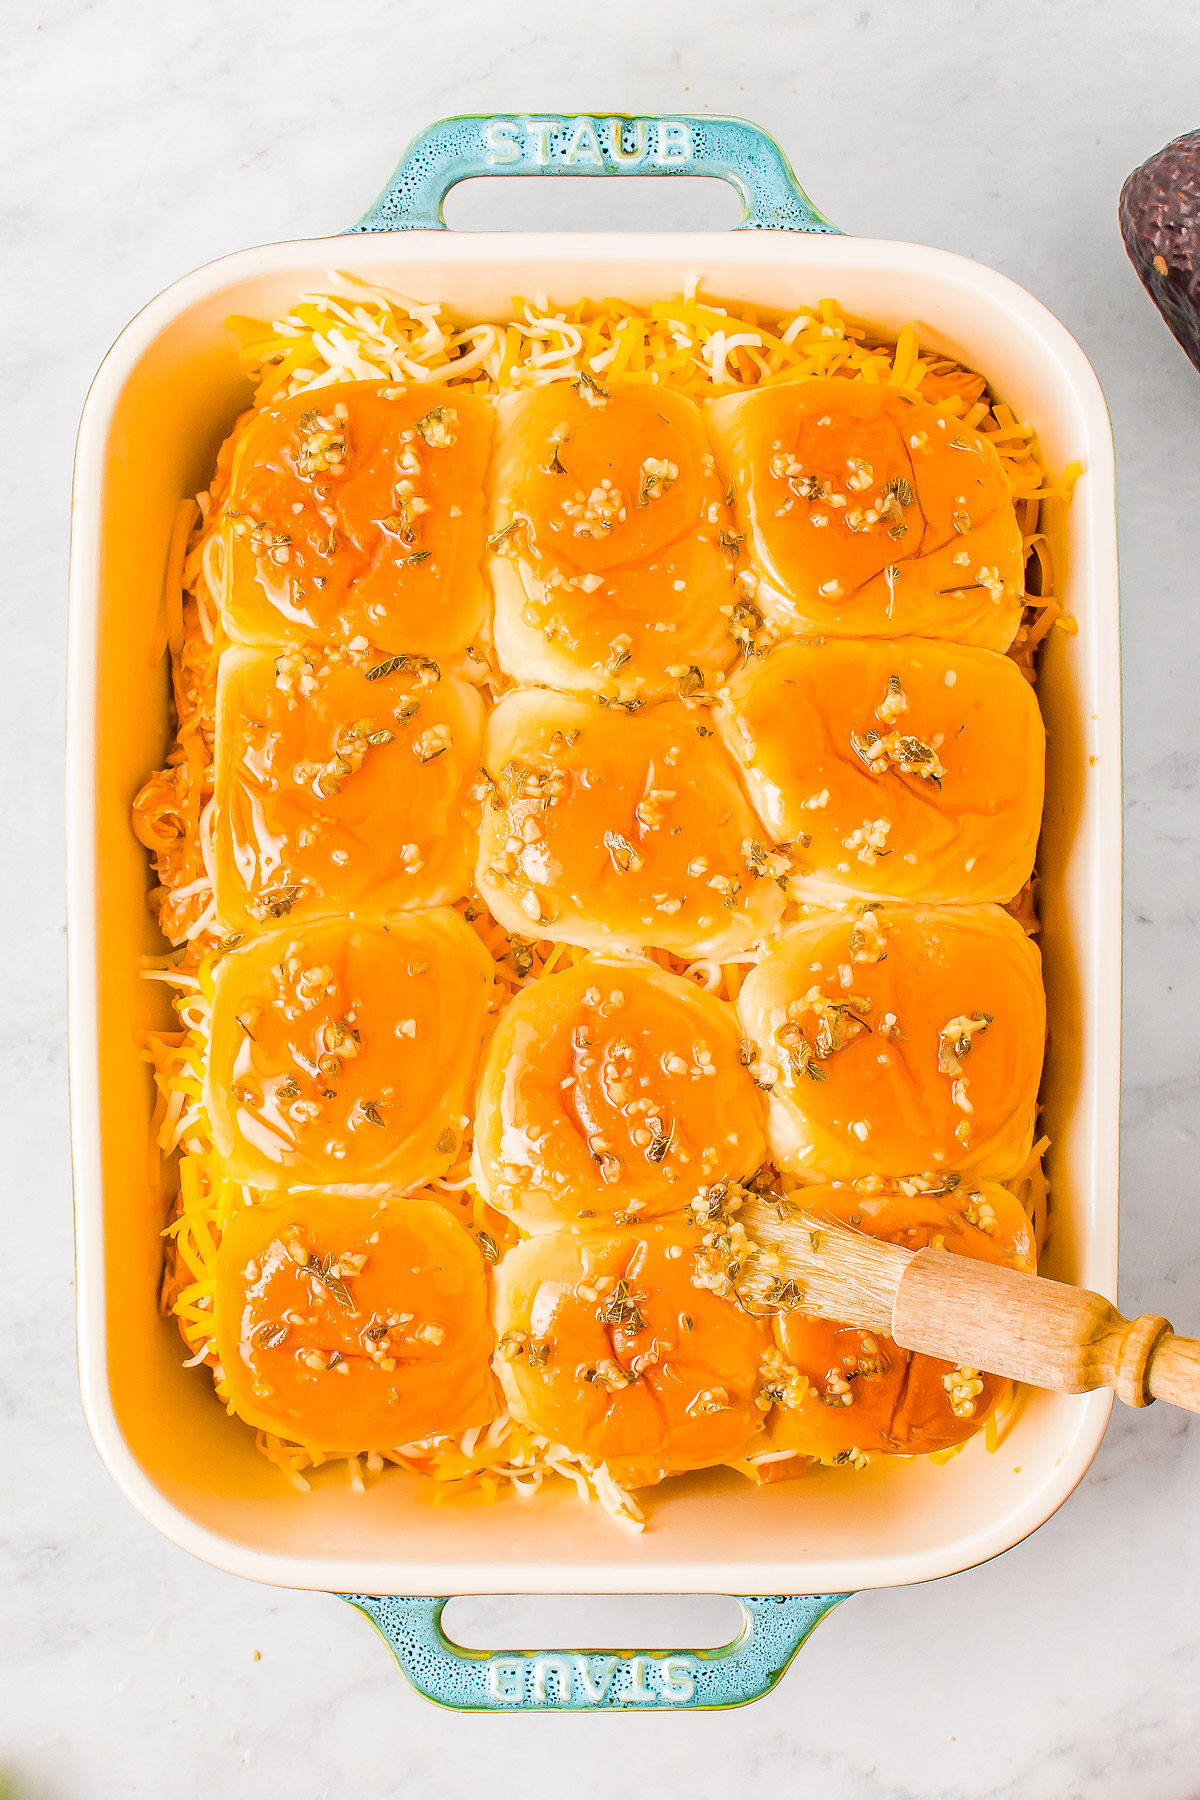 Chicken Enchilada Sliders - Juicy shredded chicken is tossed in spicy enchilada sauce and is layered in soft Hawaiian rolls along with plenty of melted cheese! Brush them with a melted garlic butter and oregano mixture and garnish with cilantro and avocado! PERFECT for entertaining, game days, Superbowl, or a FAST and EASY weeknight dinner that's ready in 30 minutes!